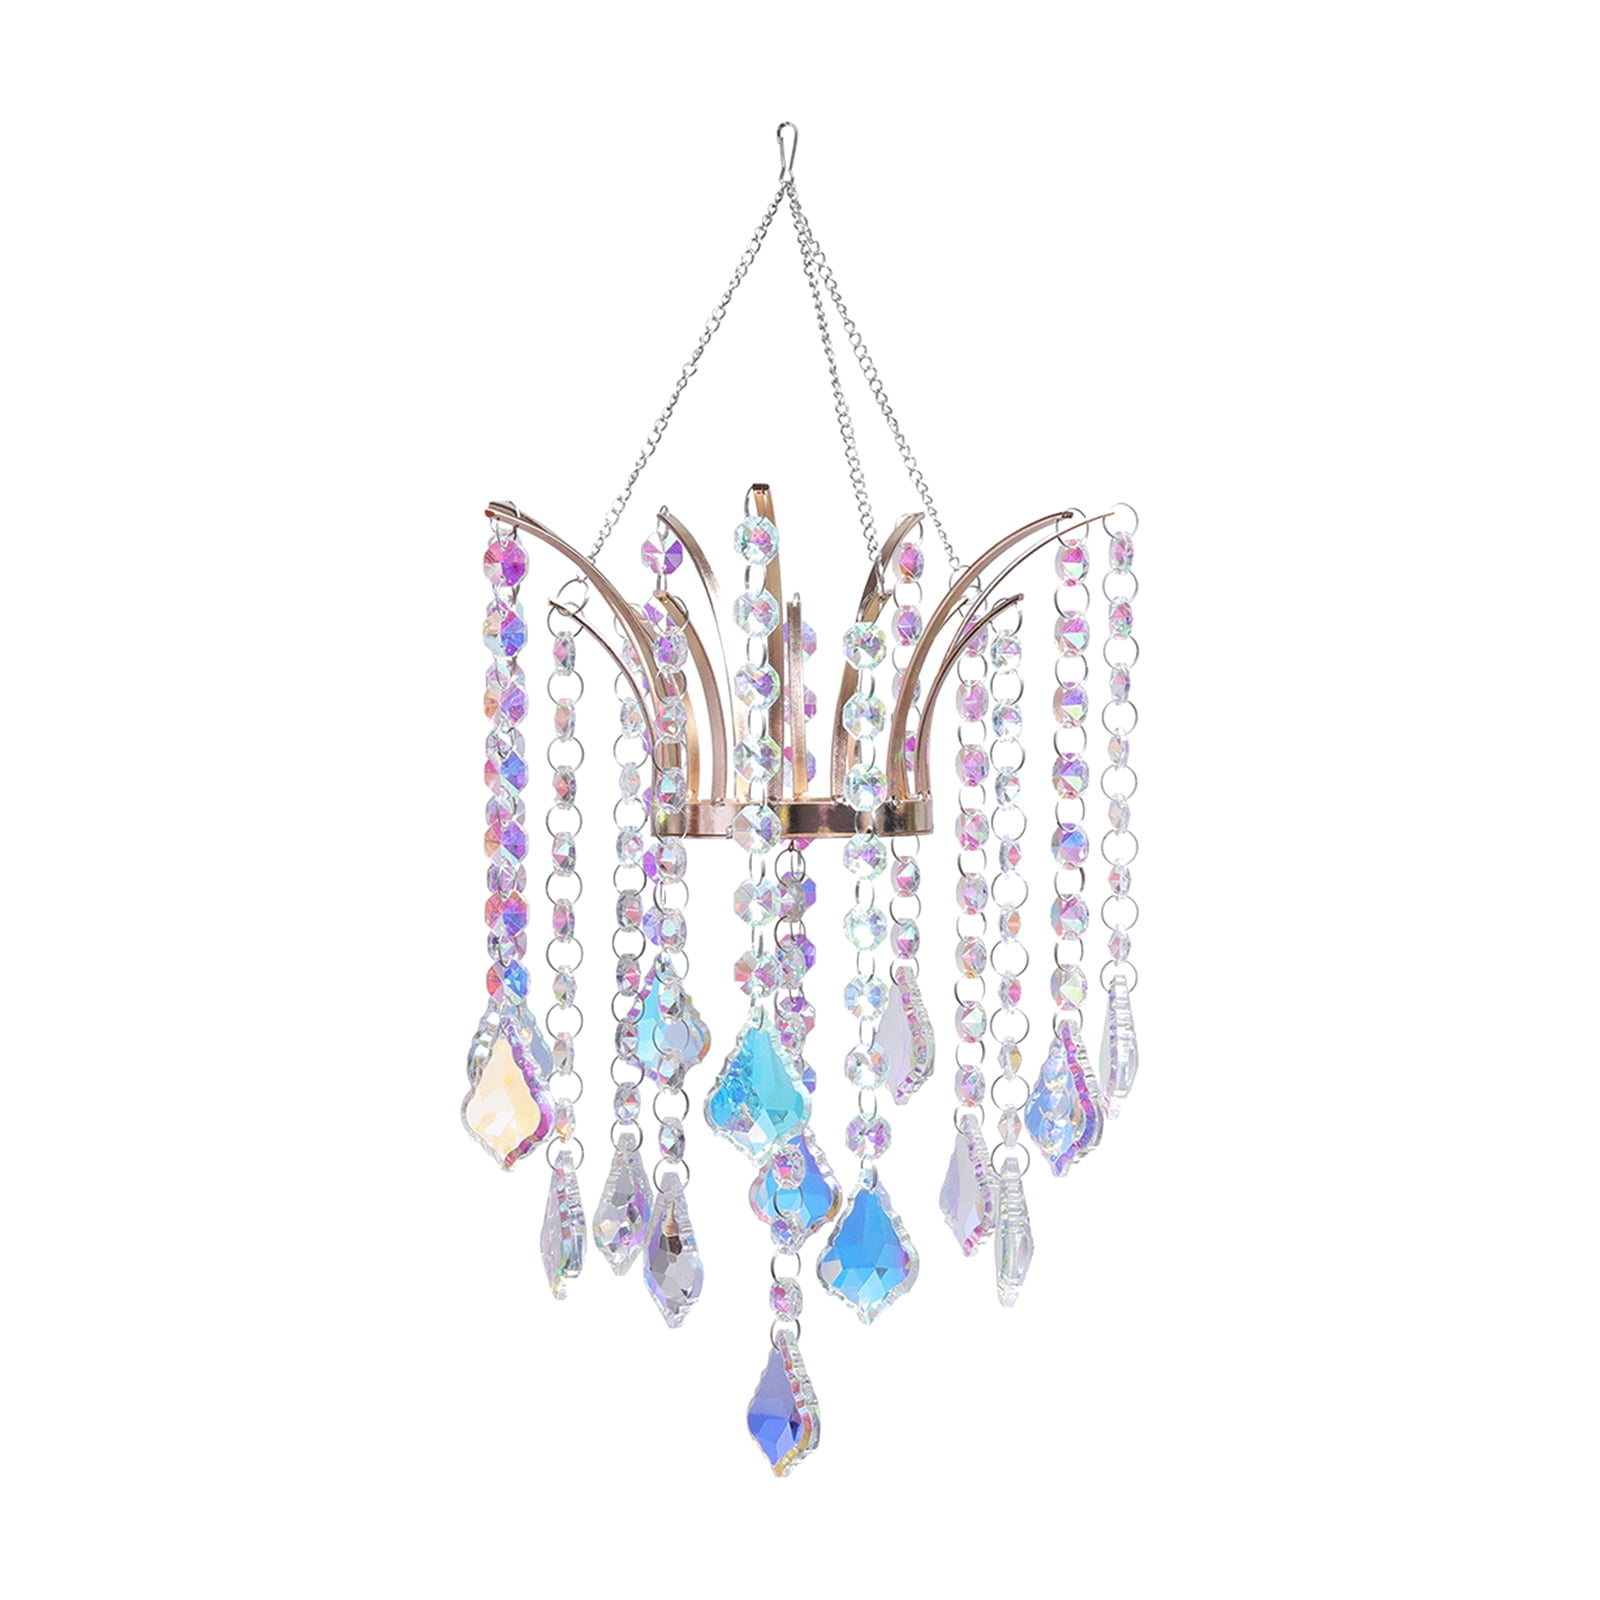 Chandelier Style Ceiling Pendant Light Shade Acrylic Crystal Ball Droplet Beads 